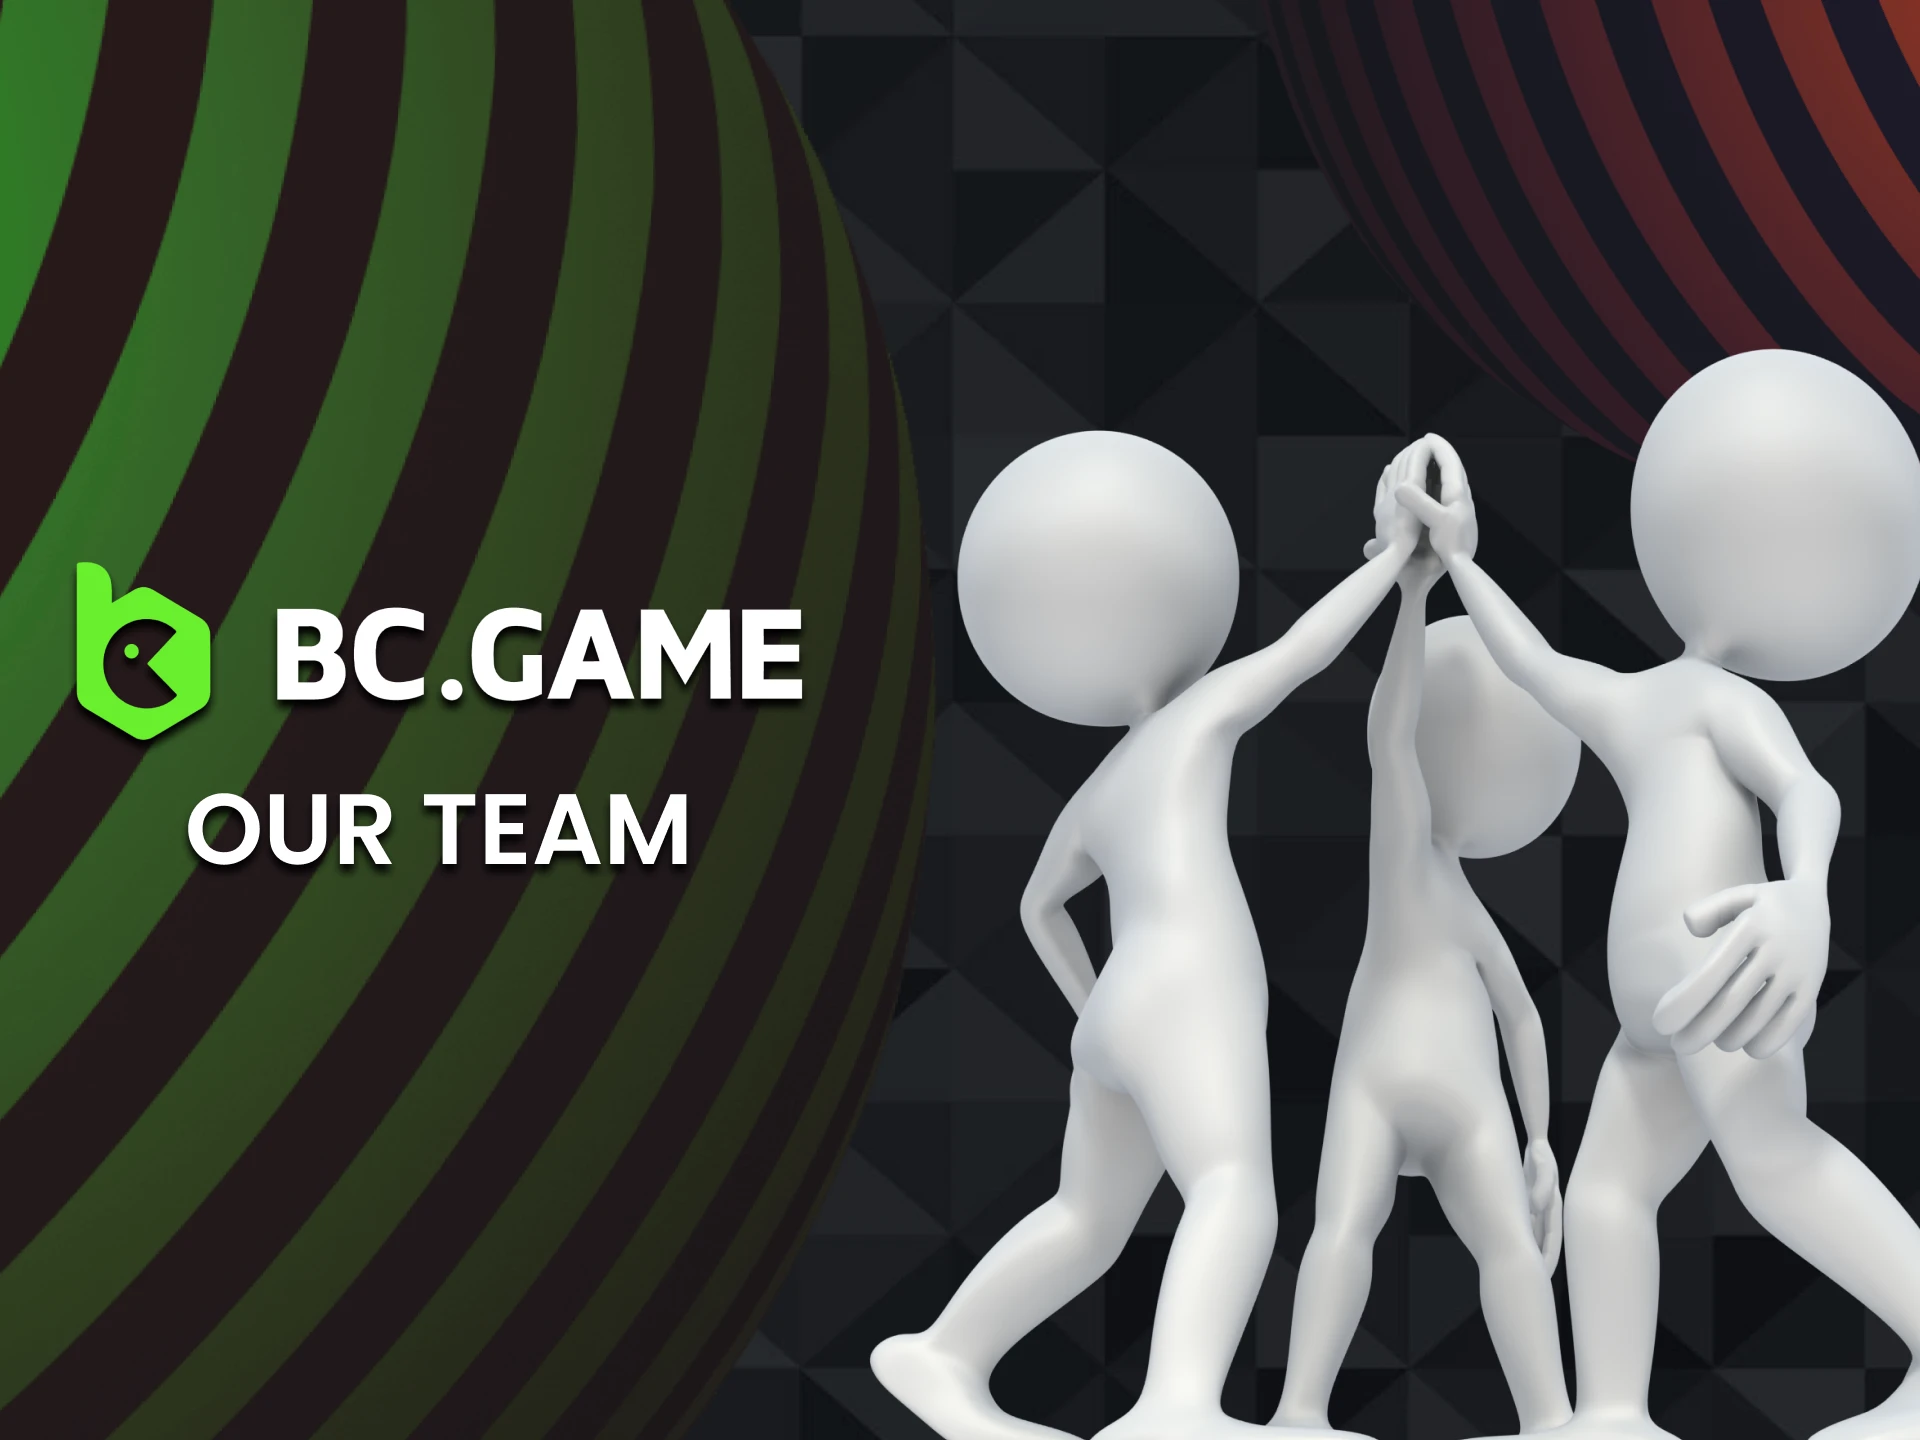 We will tell you about the BCGame team.